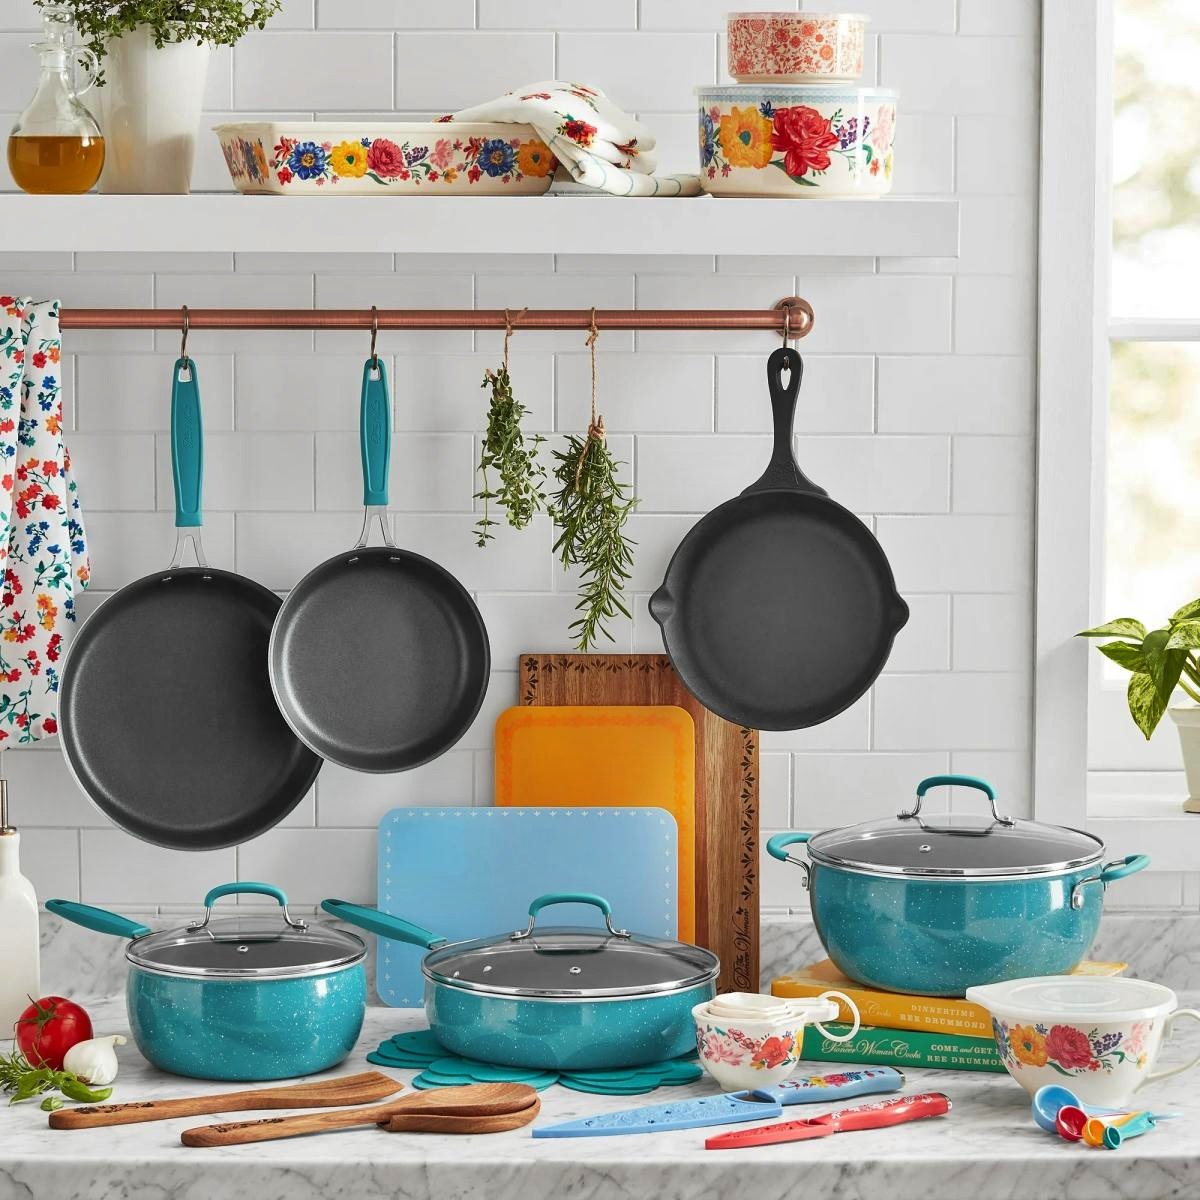 Best cookware sets: The 27 best brands to shop in 2023